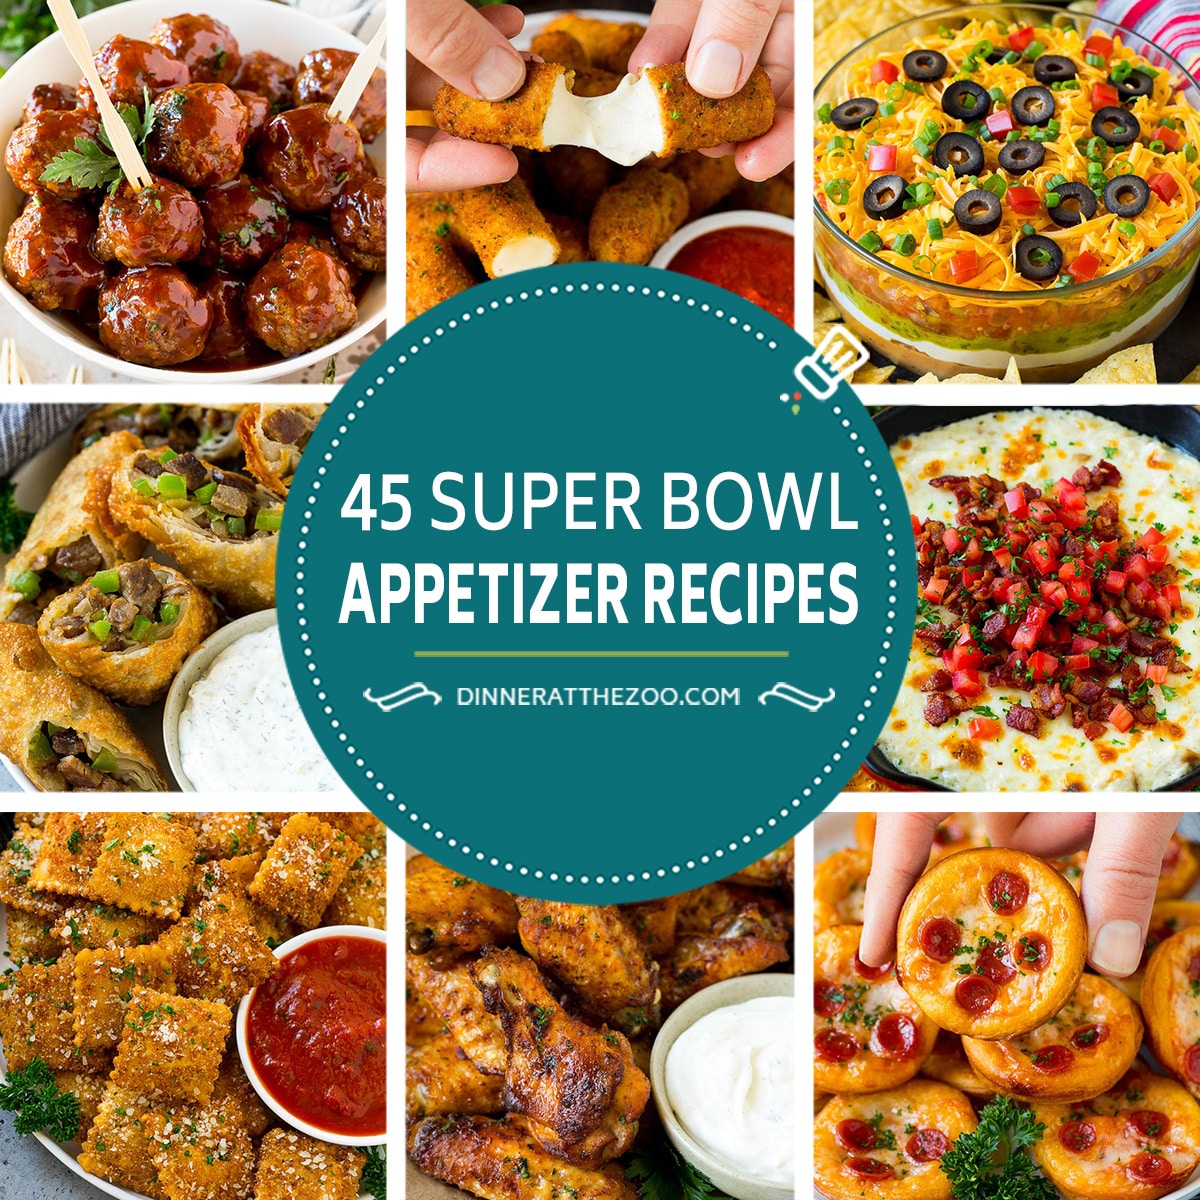 Several pictures of Super Bowl appetizer recipes including 7 layer dip, baked chicken wings and Philly cheesesteak eggrolls.